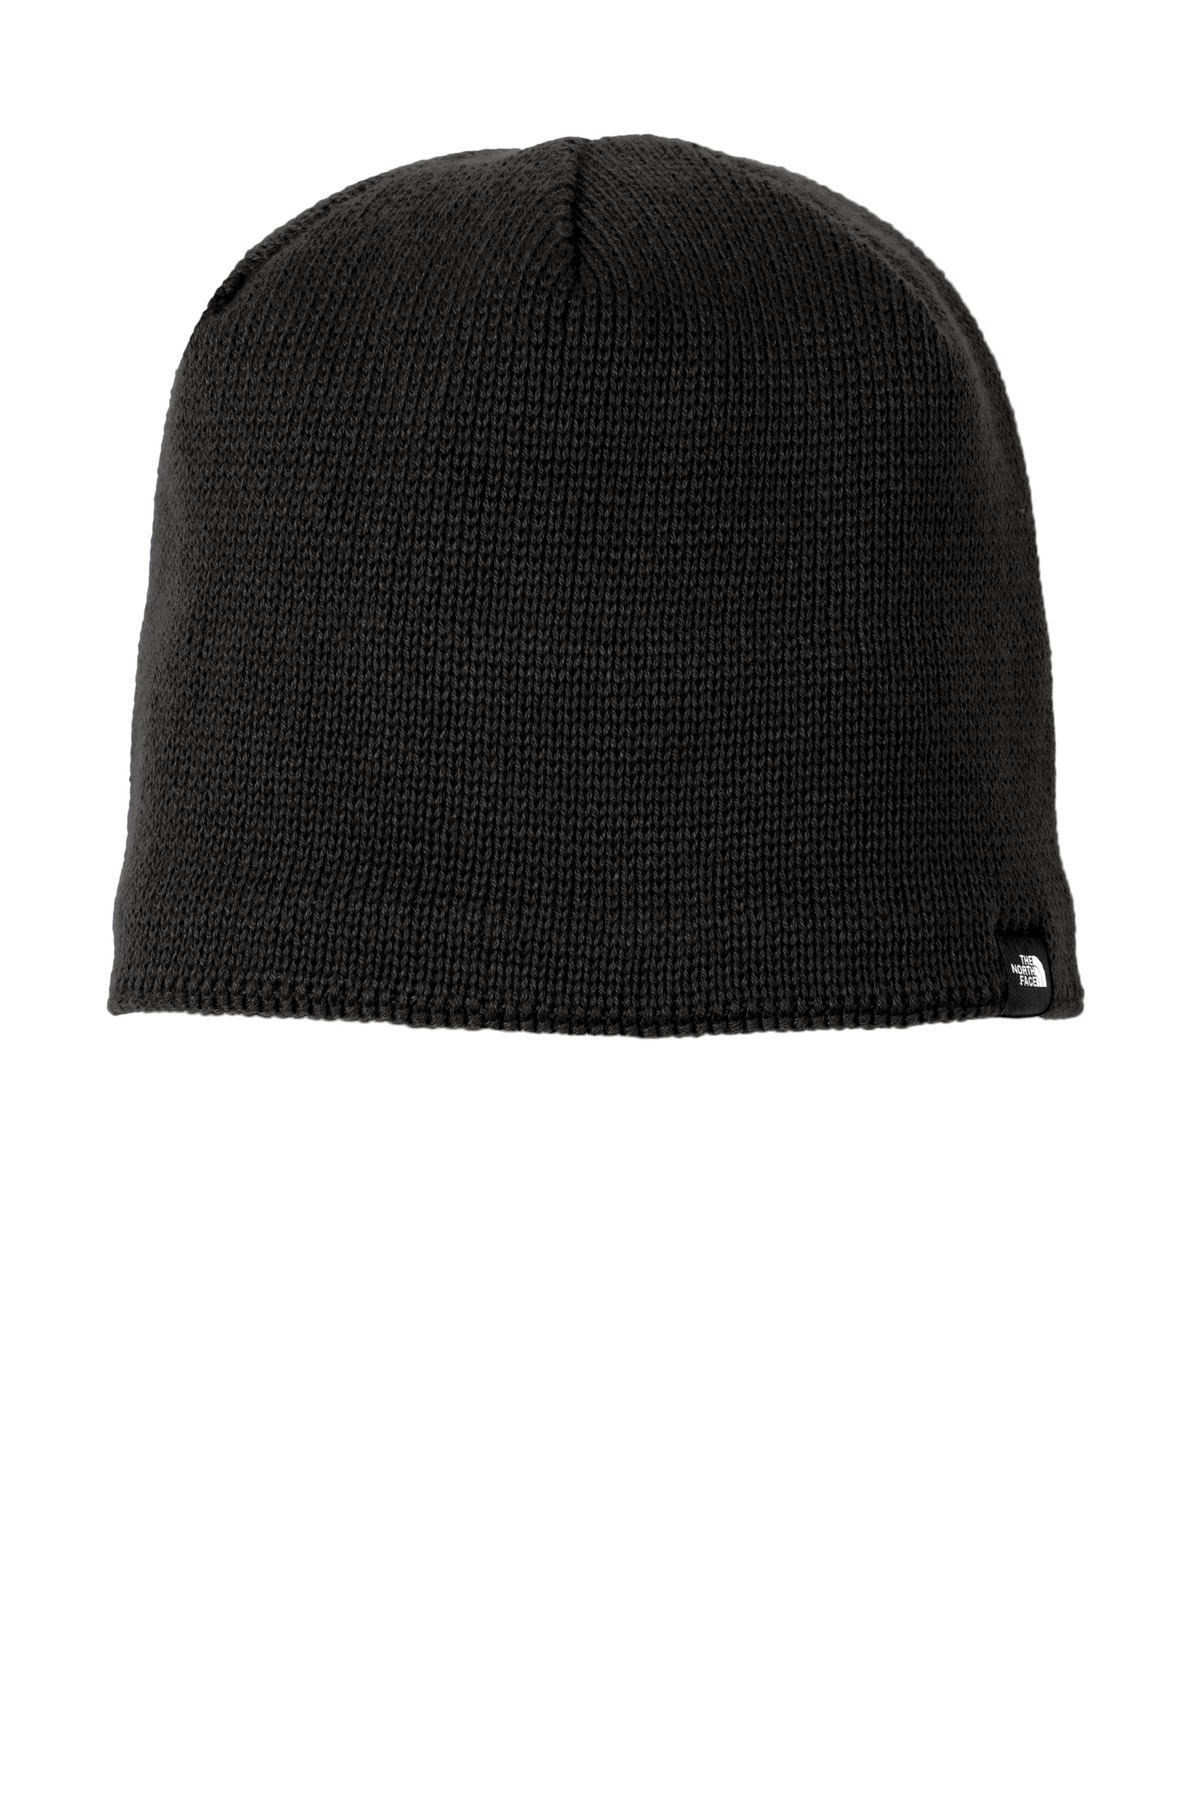 The North Face Mountain Beanie-The North Face